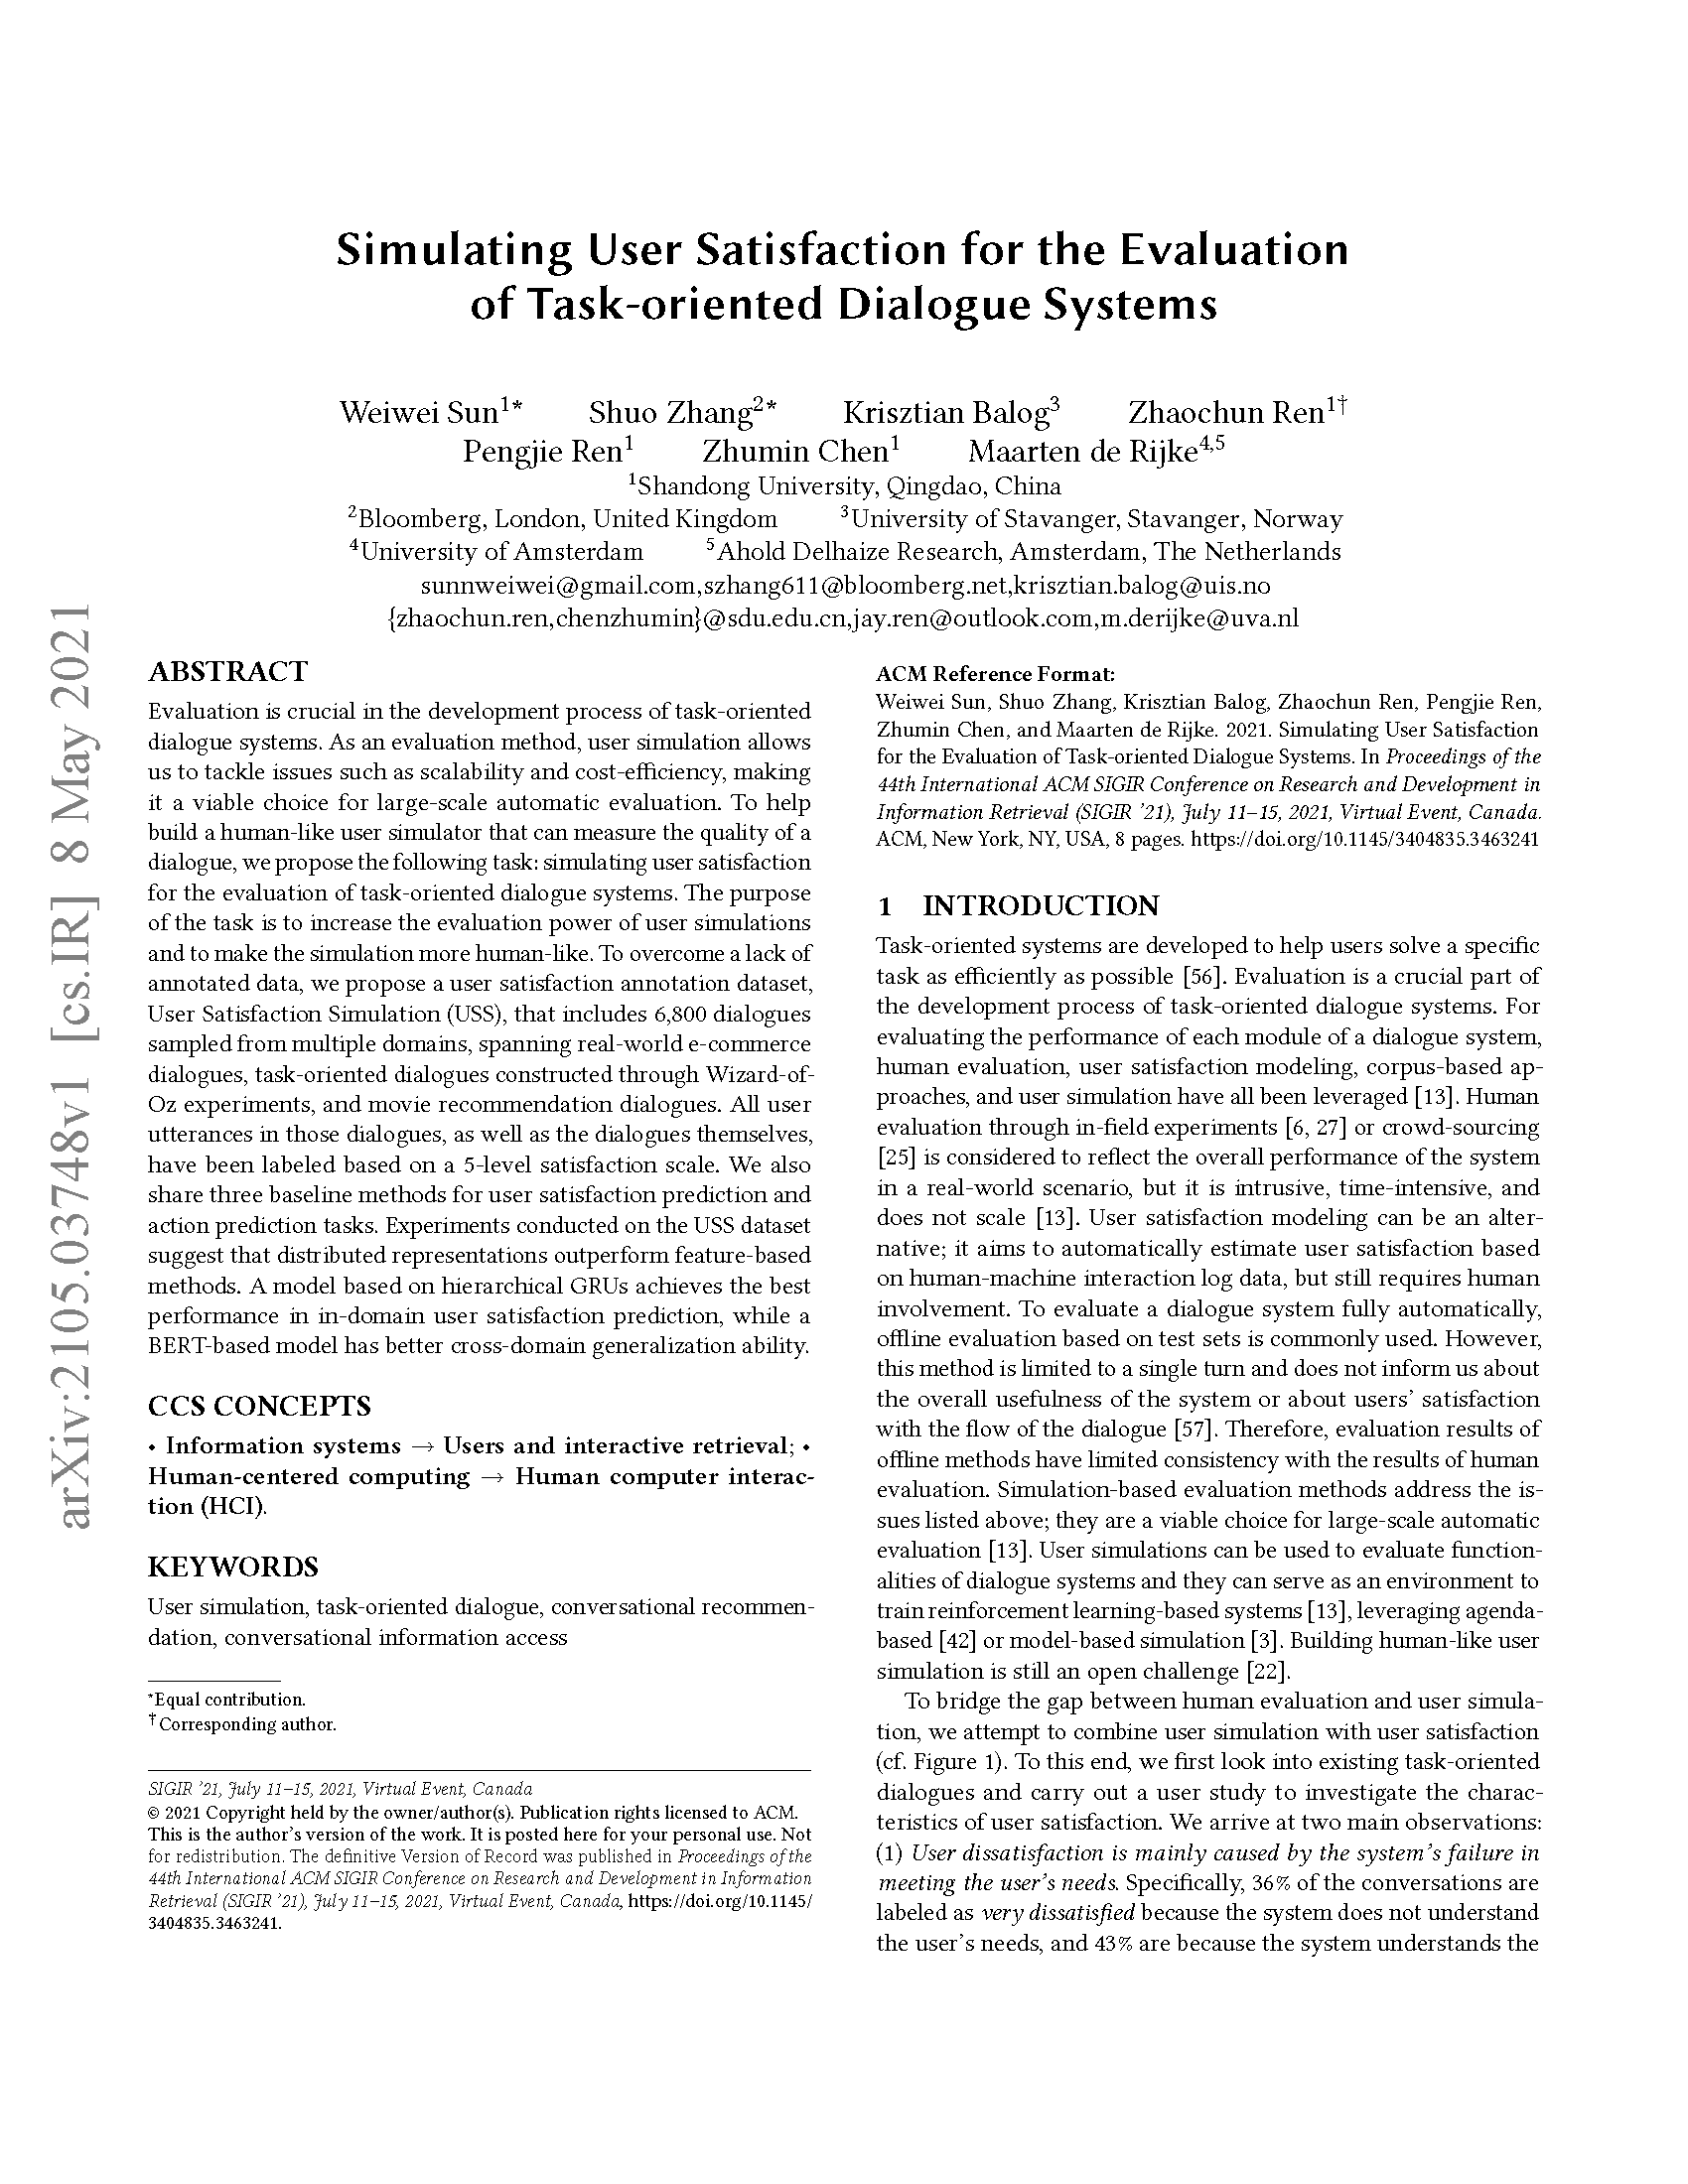 Click to read "Simulating User Satisfaction for the Evaluation of Task-oriented Dialogue Systems" published at SIGIR 2021 on July 14, 2021